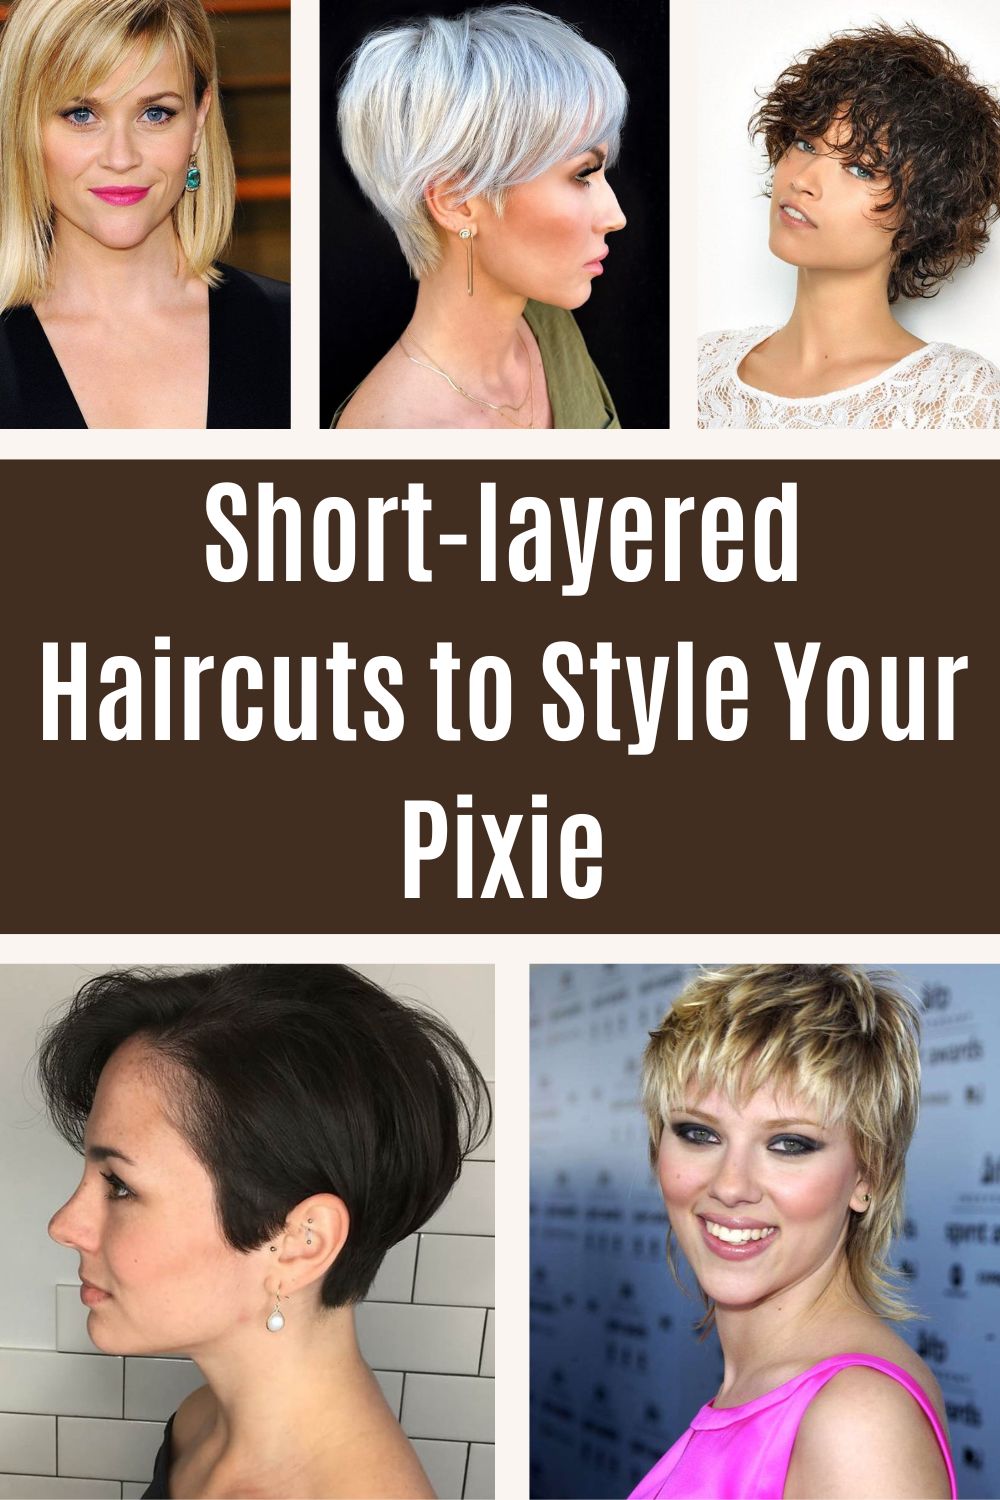 Short-layered Haircuts to Style Your Pixie